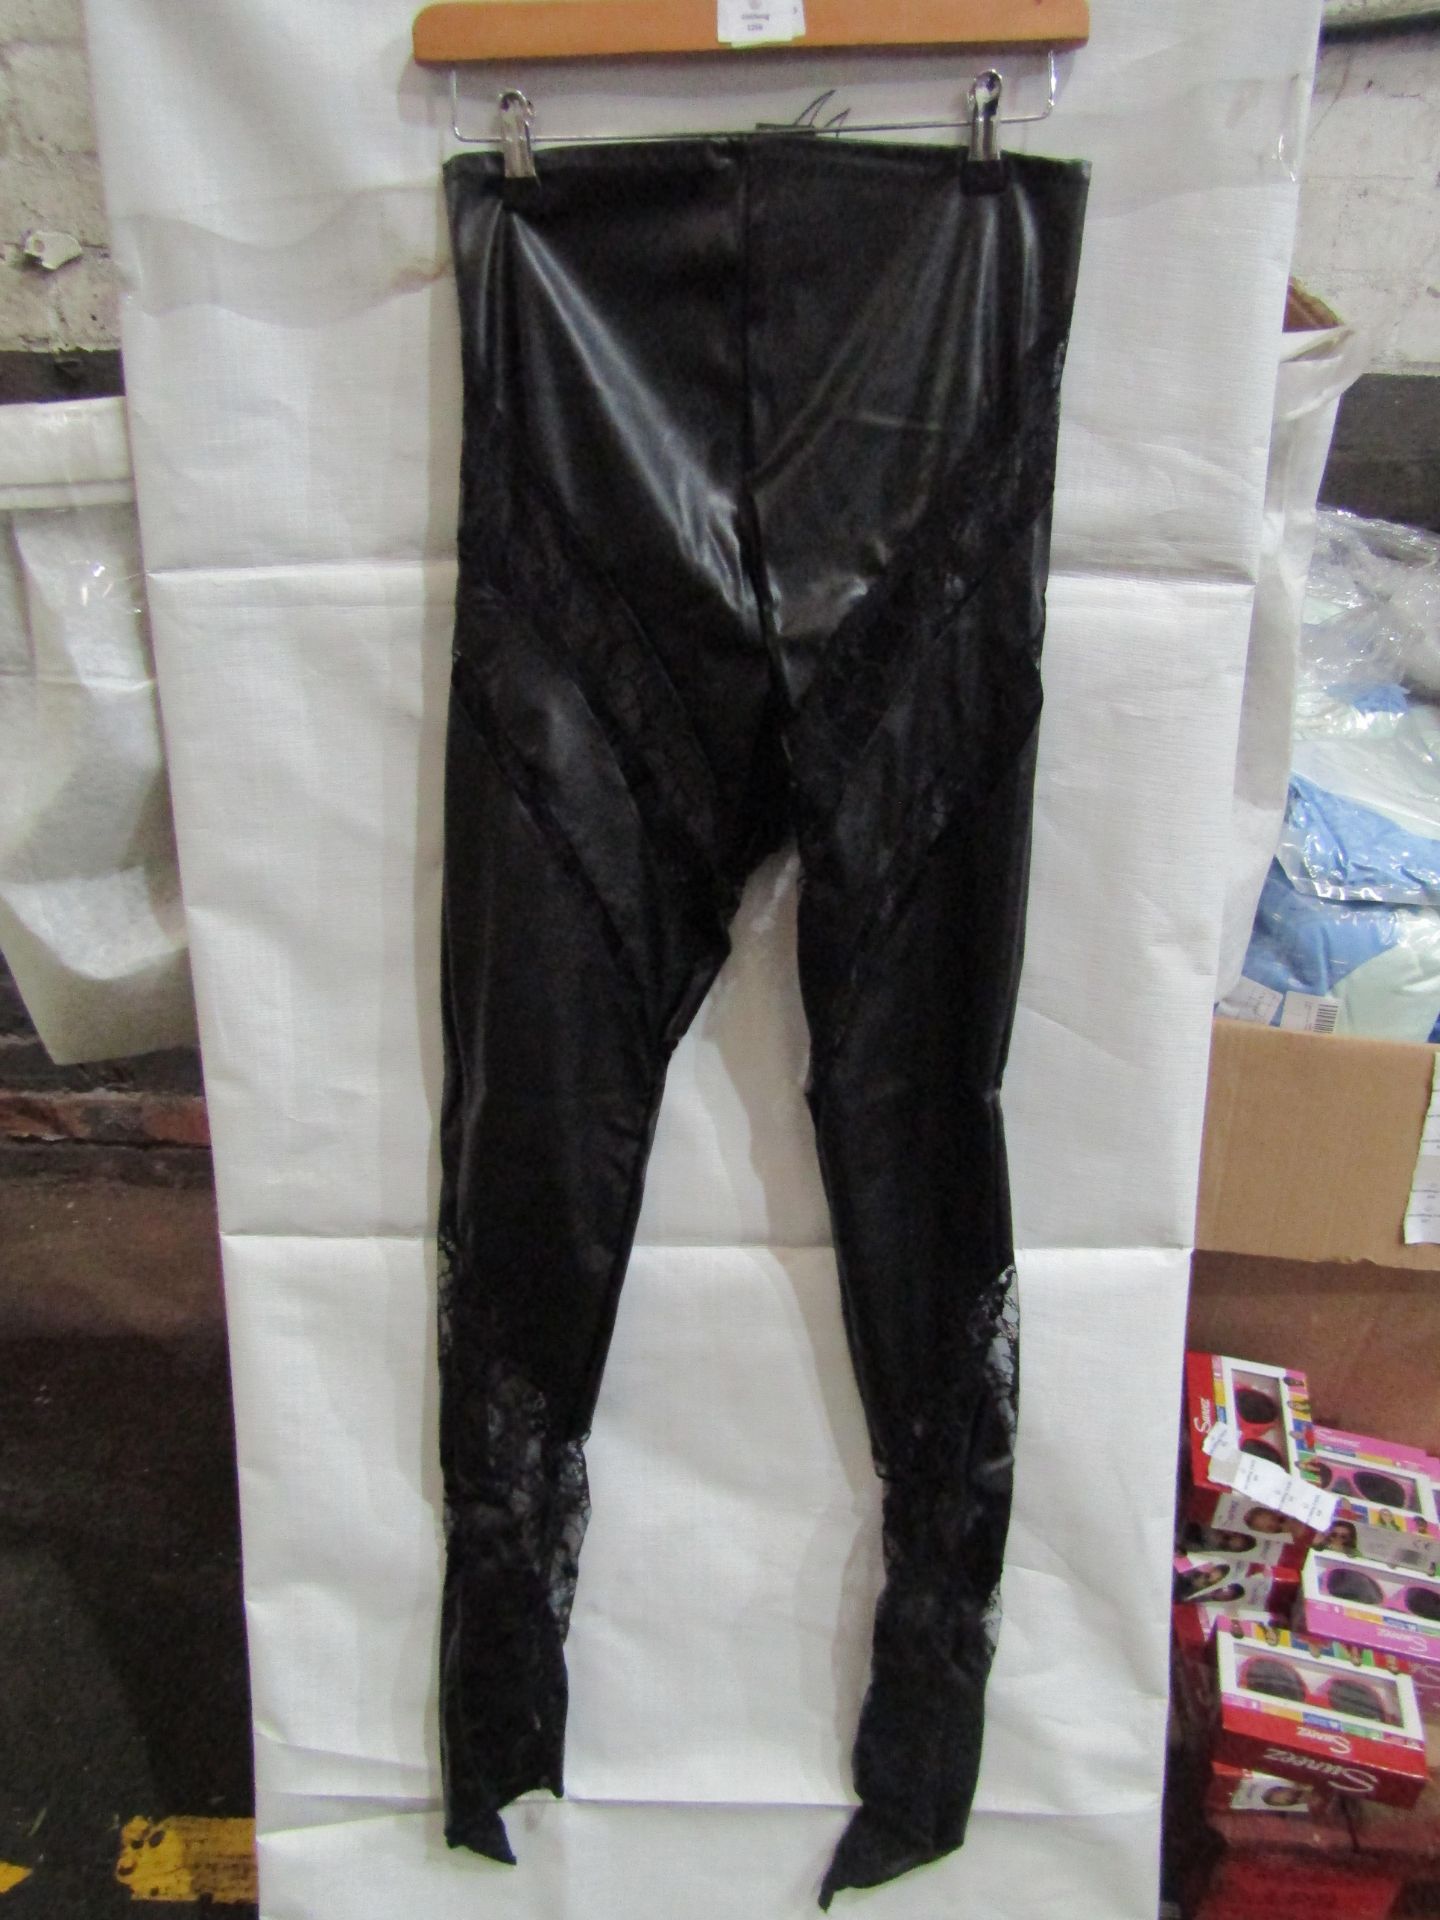 5x Pretty Little Thing Shape Black Faux Leather Lace Insert Leggings, Size 12, New & Packaged.